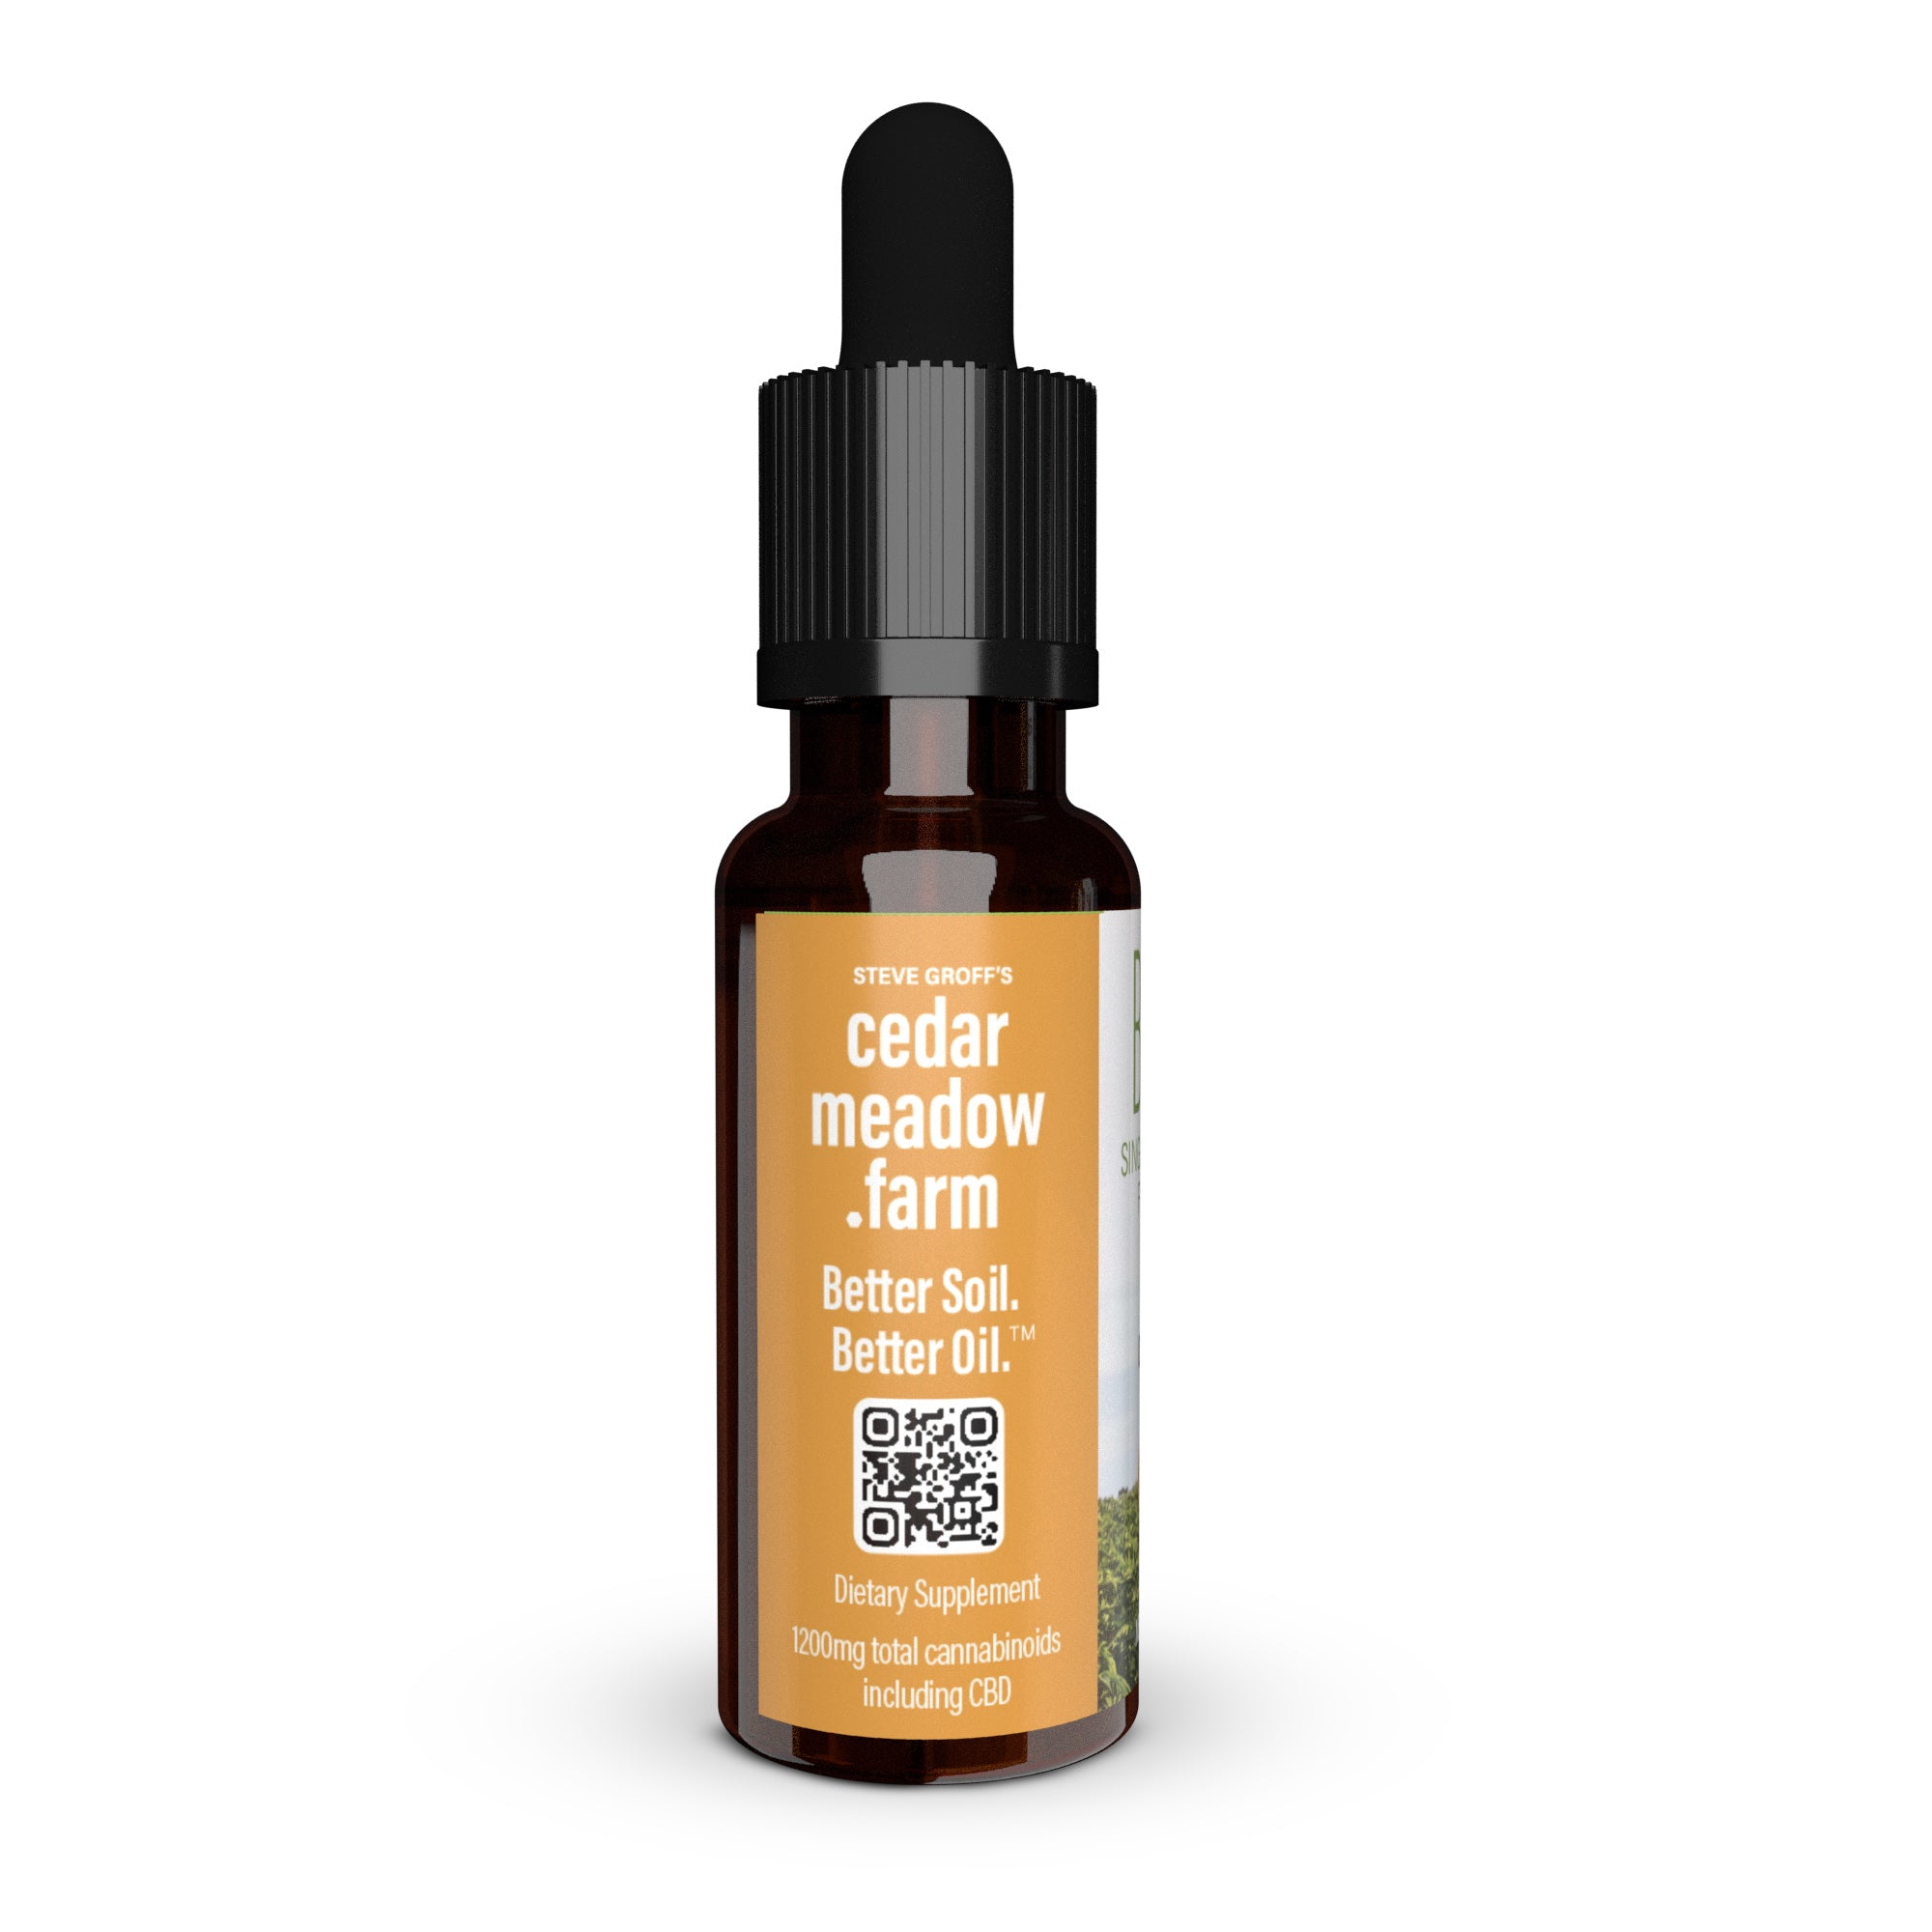 CBD Oil Original Flavor-A crisp new look for the same incredible oil that you've come to love!We made BETTER just for you. Full Spectrum: All of the naturally-occurring compounds in the -Cedar Meadow Farm